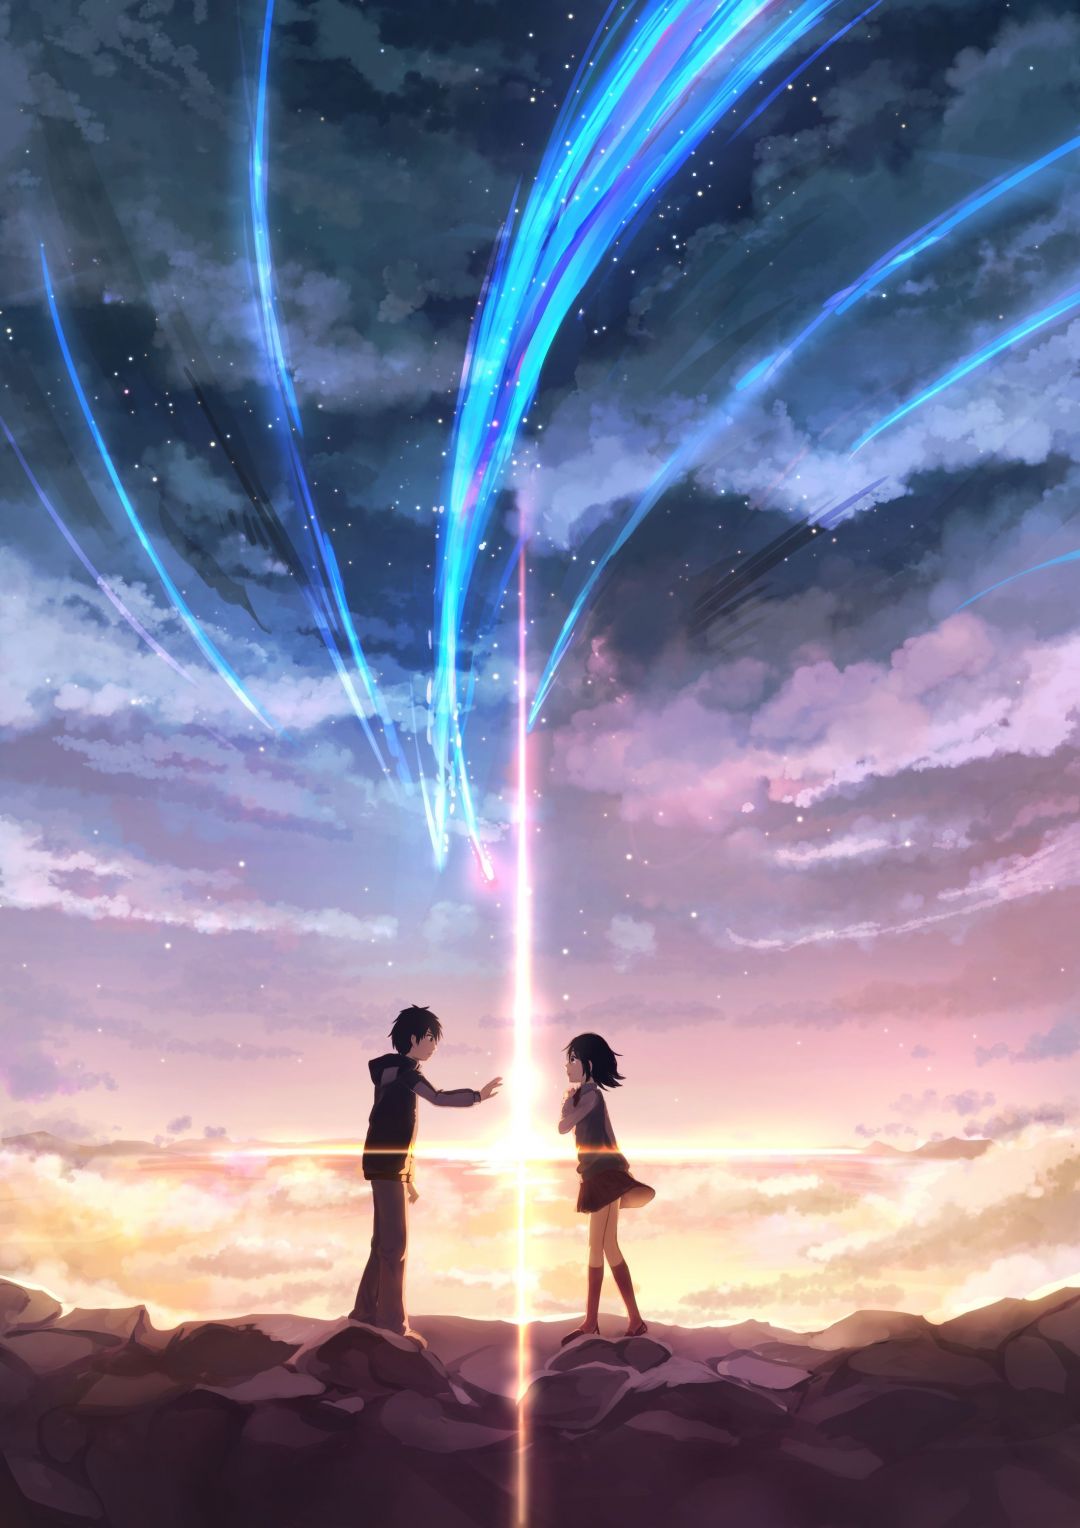 ✓[2110+] Your Name Anime - Android, iPhone, Desktop HD Backgrounds /  Wallpapers (1080p, 4k) (png / jpg) (2023)